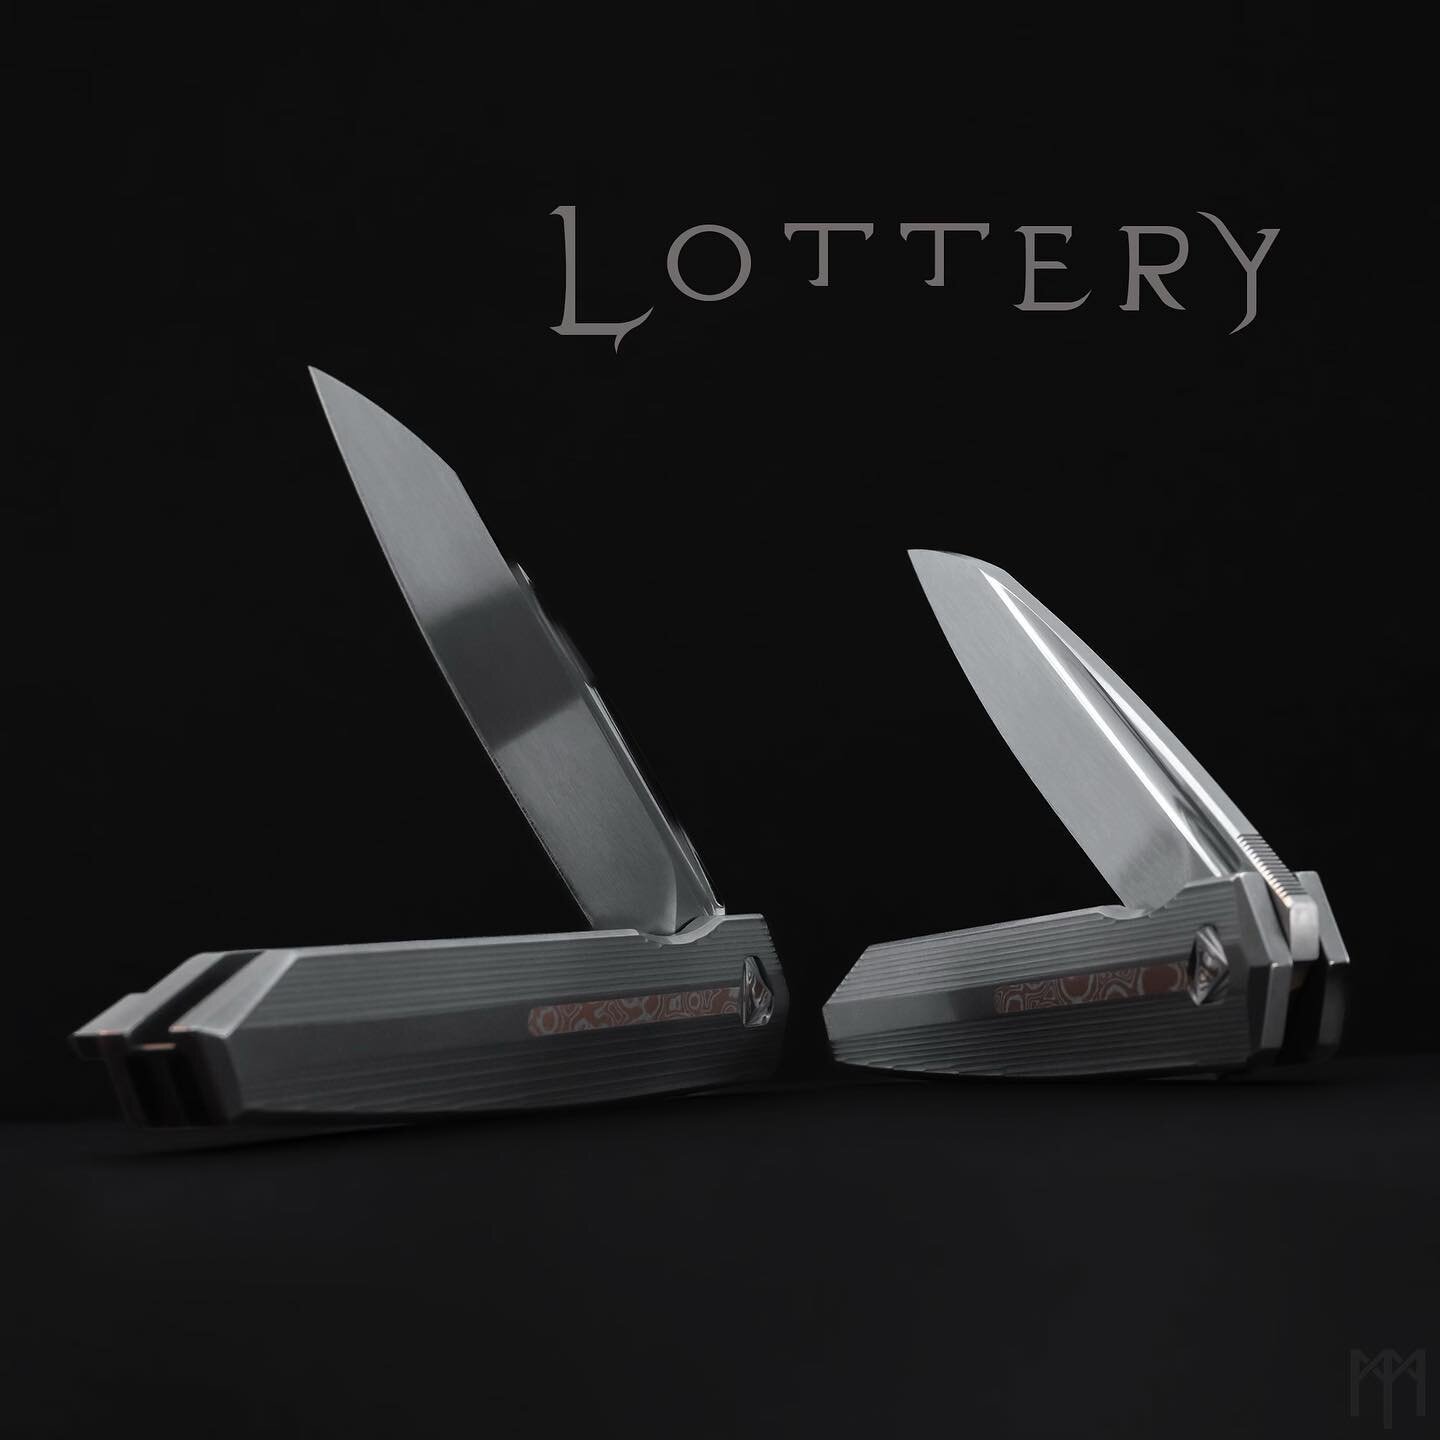 ☞ LOTTERY now live!
for (9) 25th Anniversary custom Cypher III&rsquo;s
SPECS
blade length: 3.7&rdquo;
OAL: 8 3/8&rdquo;
blades: hand polished S90V Rc 61/62
frames: bright finish 6AL4V titanium with mokume inlay on presentation sides
clips: 6AL4V tita